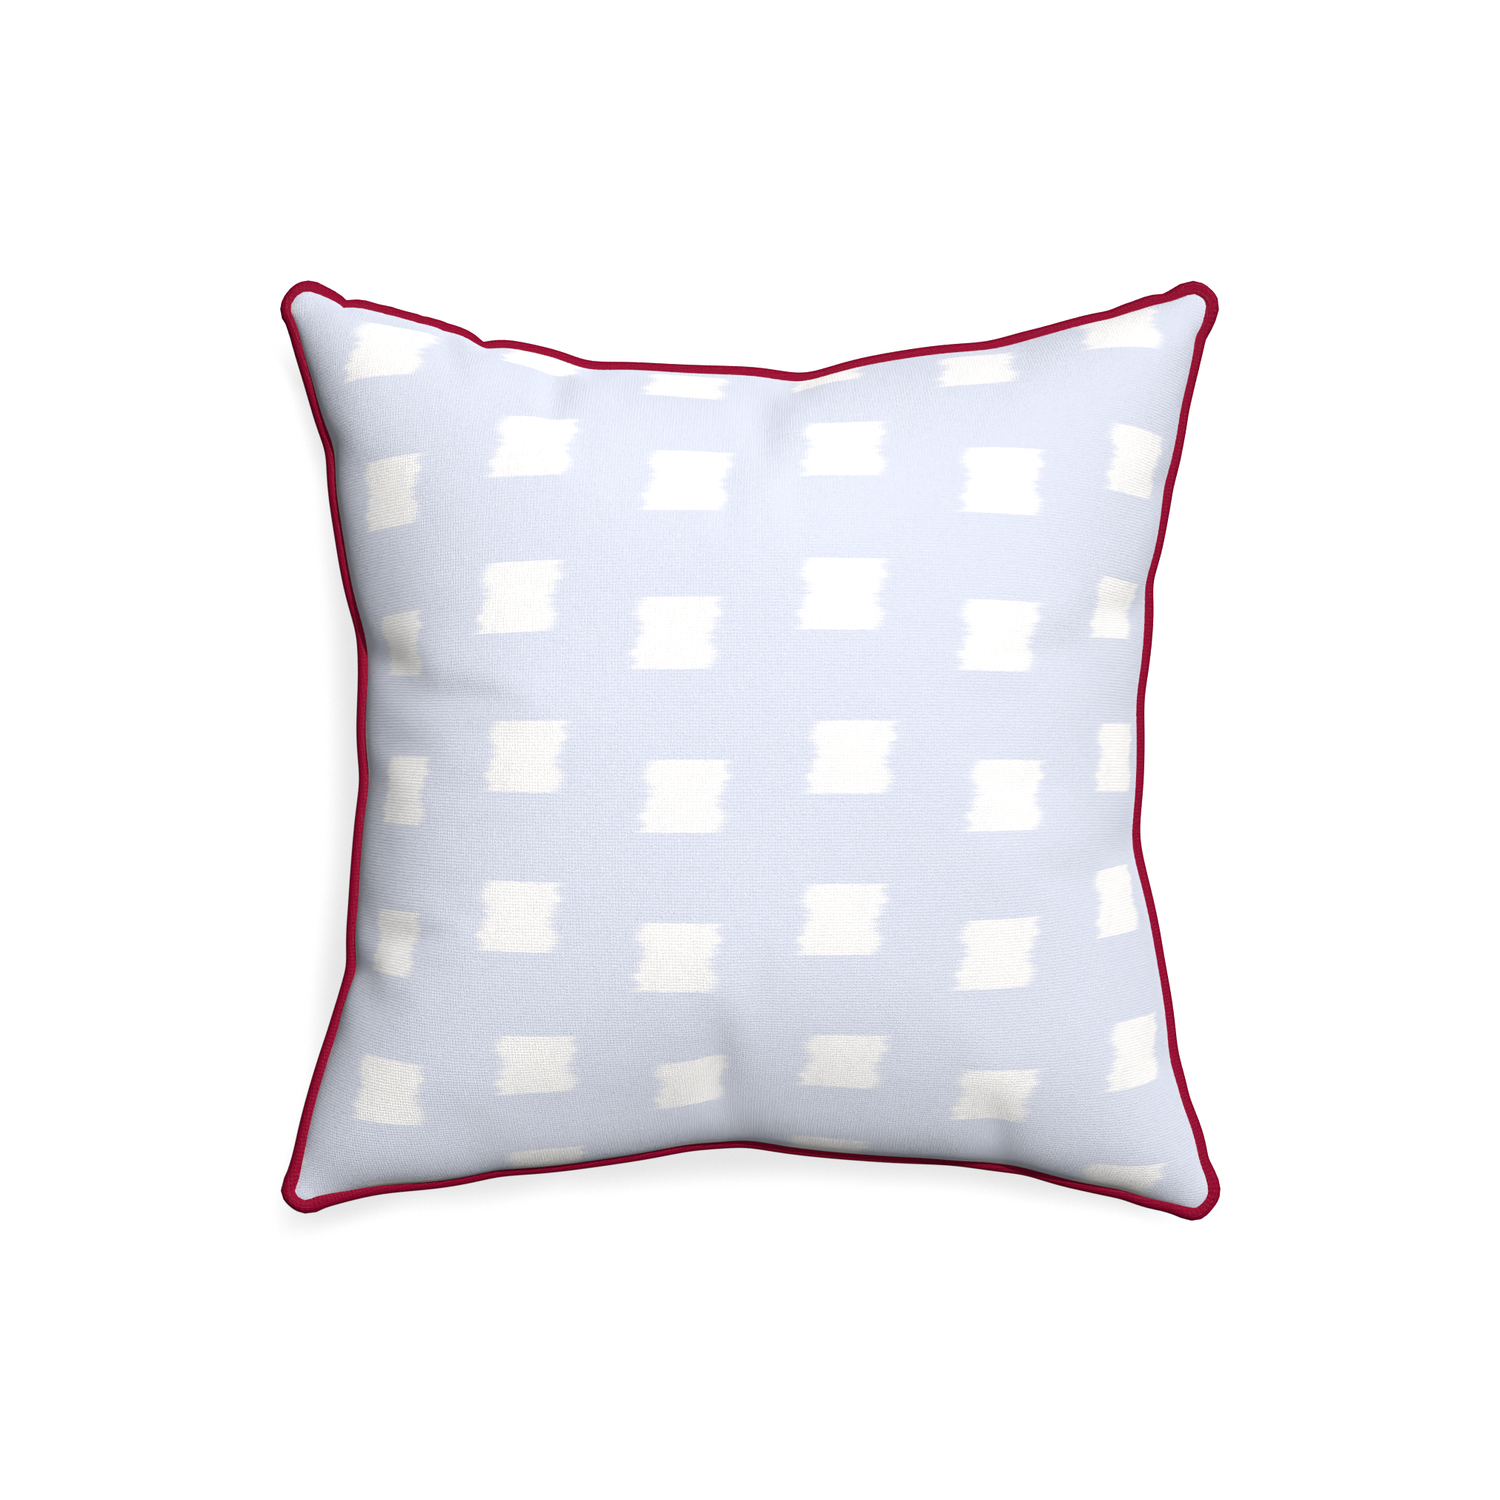 20-square denton custom sky blue patternpillow with raspberry piping on white background